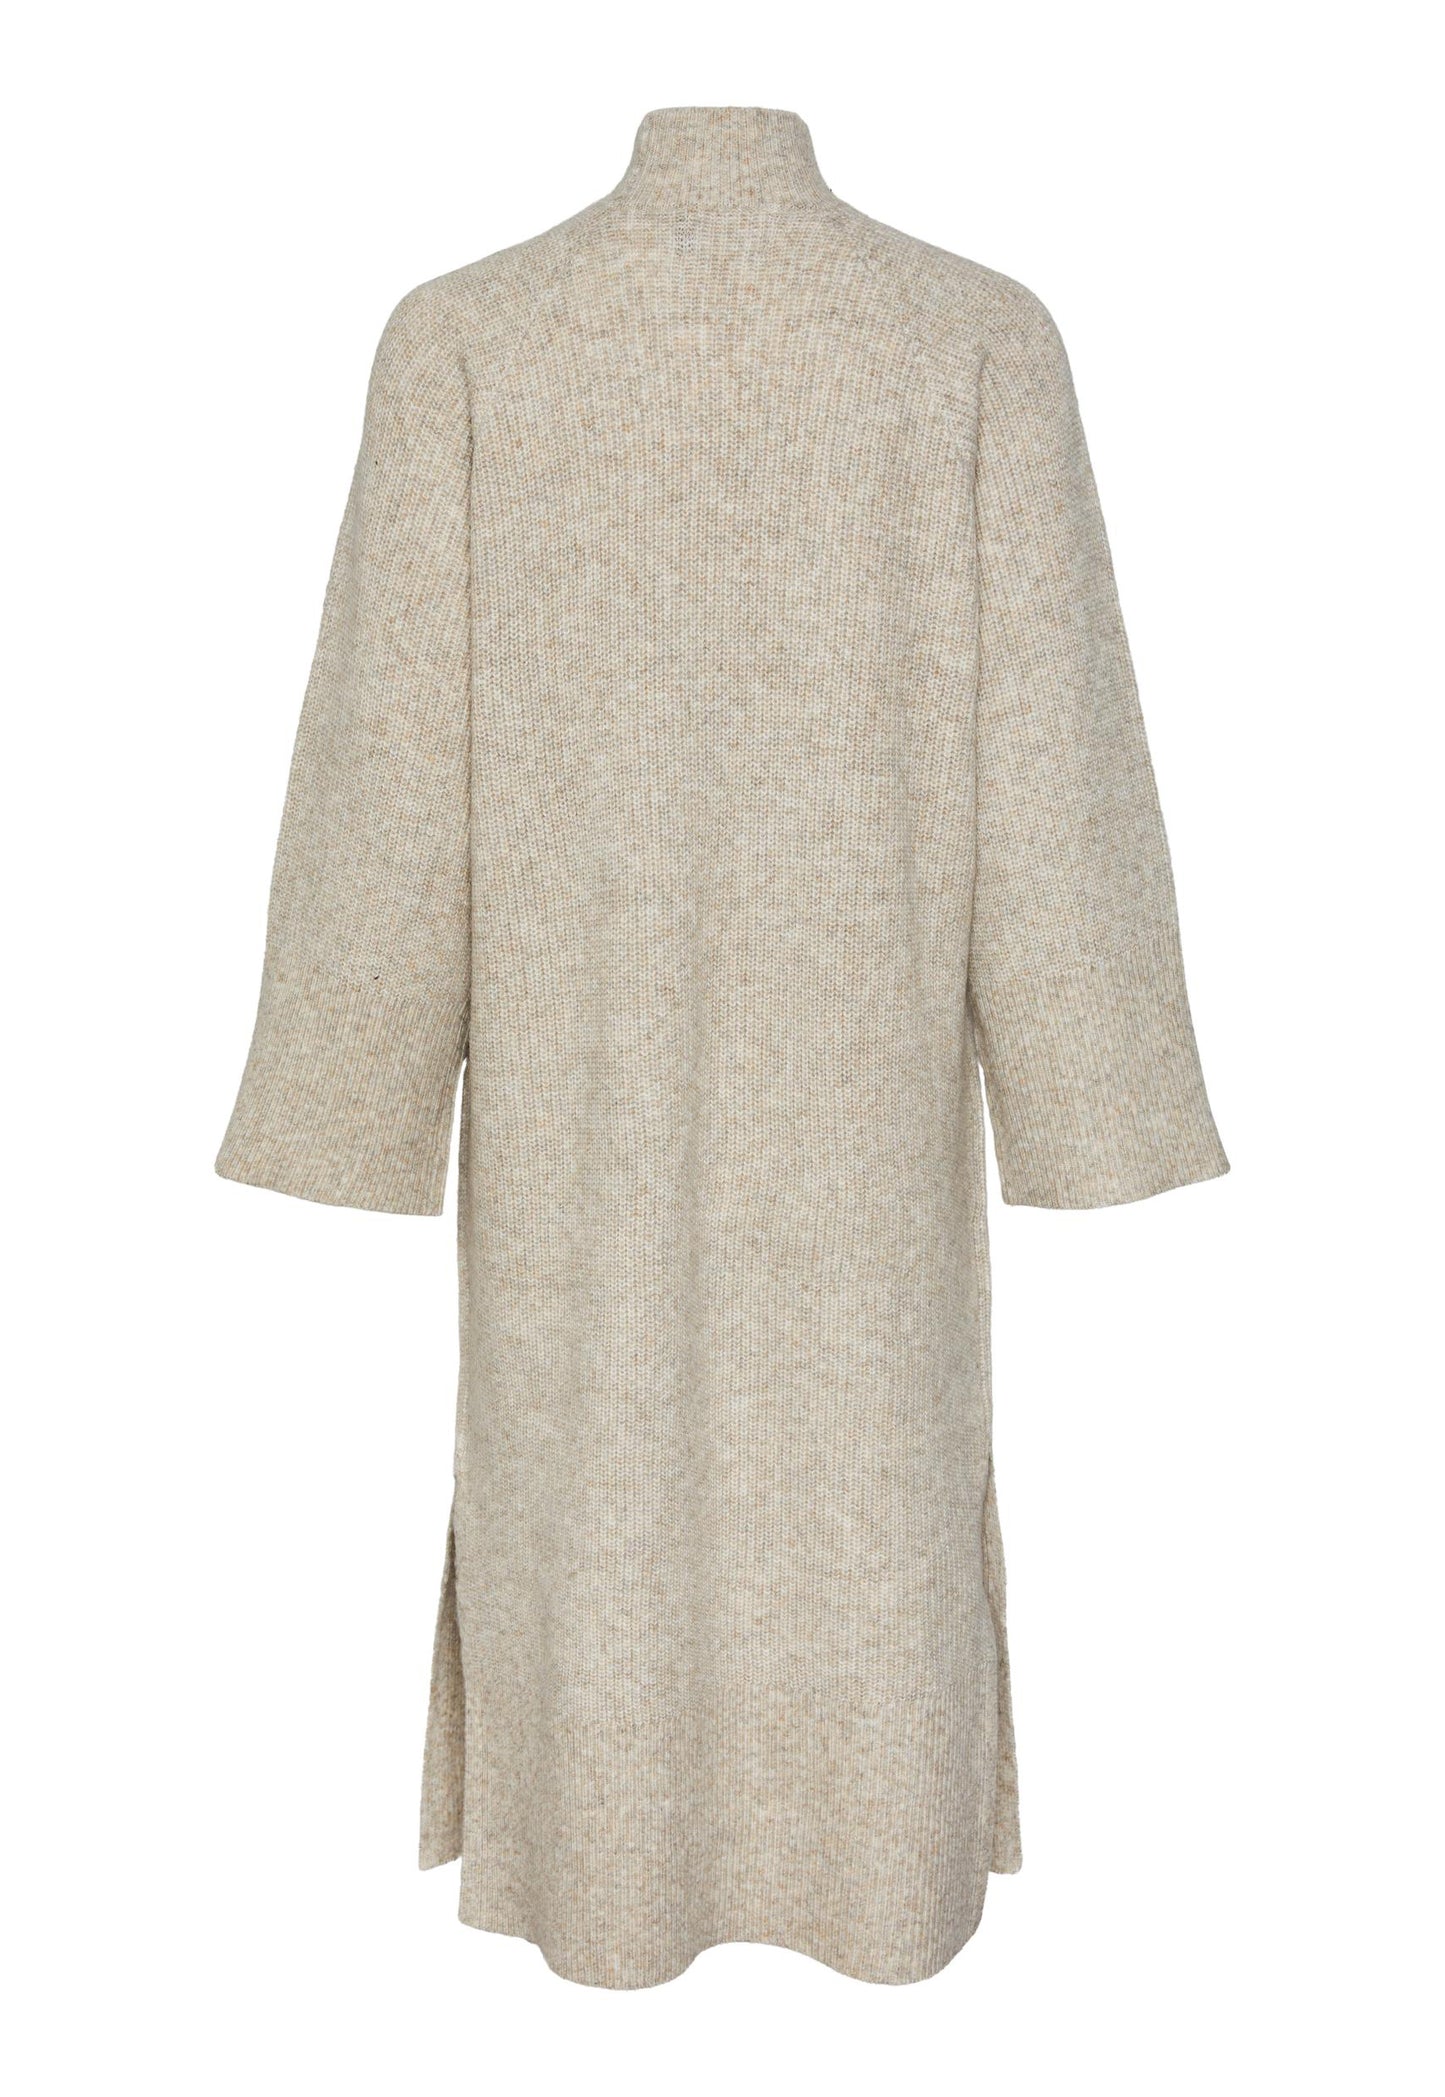 
                  
                    PIECES Jade Oversized Chunky Knit Long Sleeve High Neck Jumper Dress in Cream Melange - One Nation Clothing
                  
                